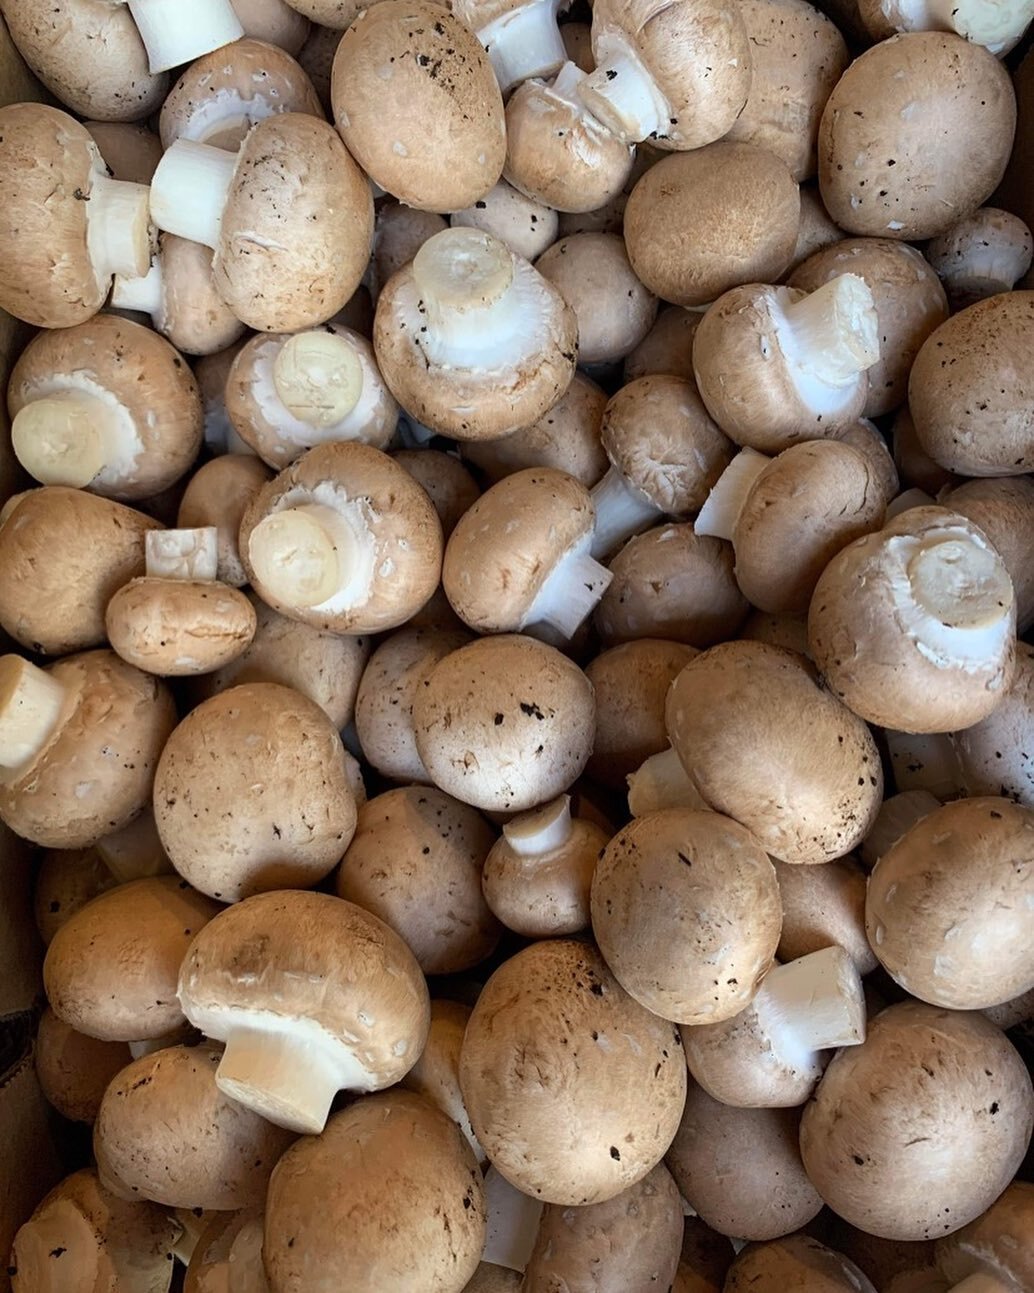 Beautiful Gippsland Mushrooms in store today! Along with lots of other fresh produce, cheeses &amp; local wines to keep you stocked up over the weekend 🌱